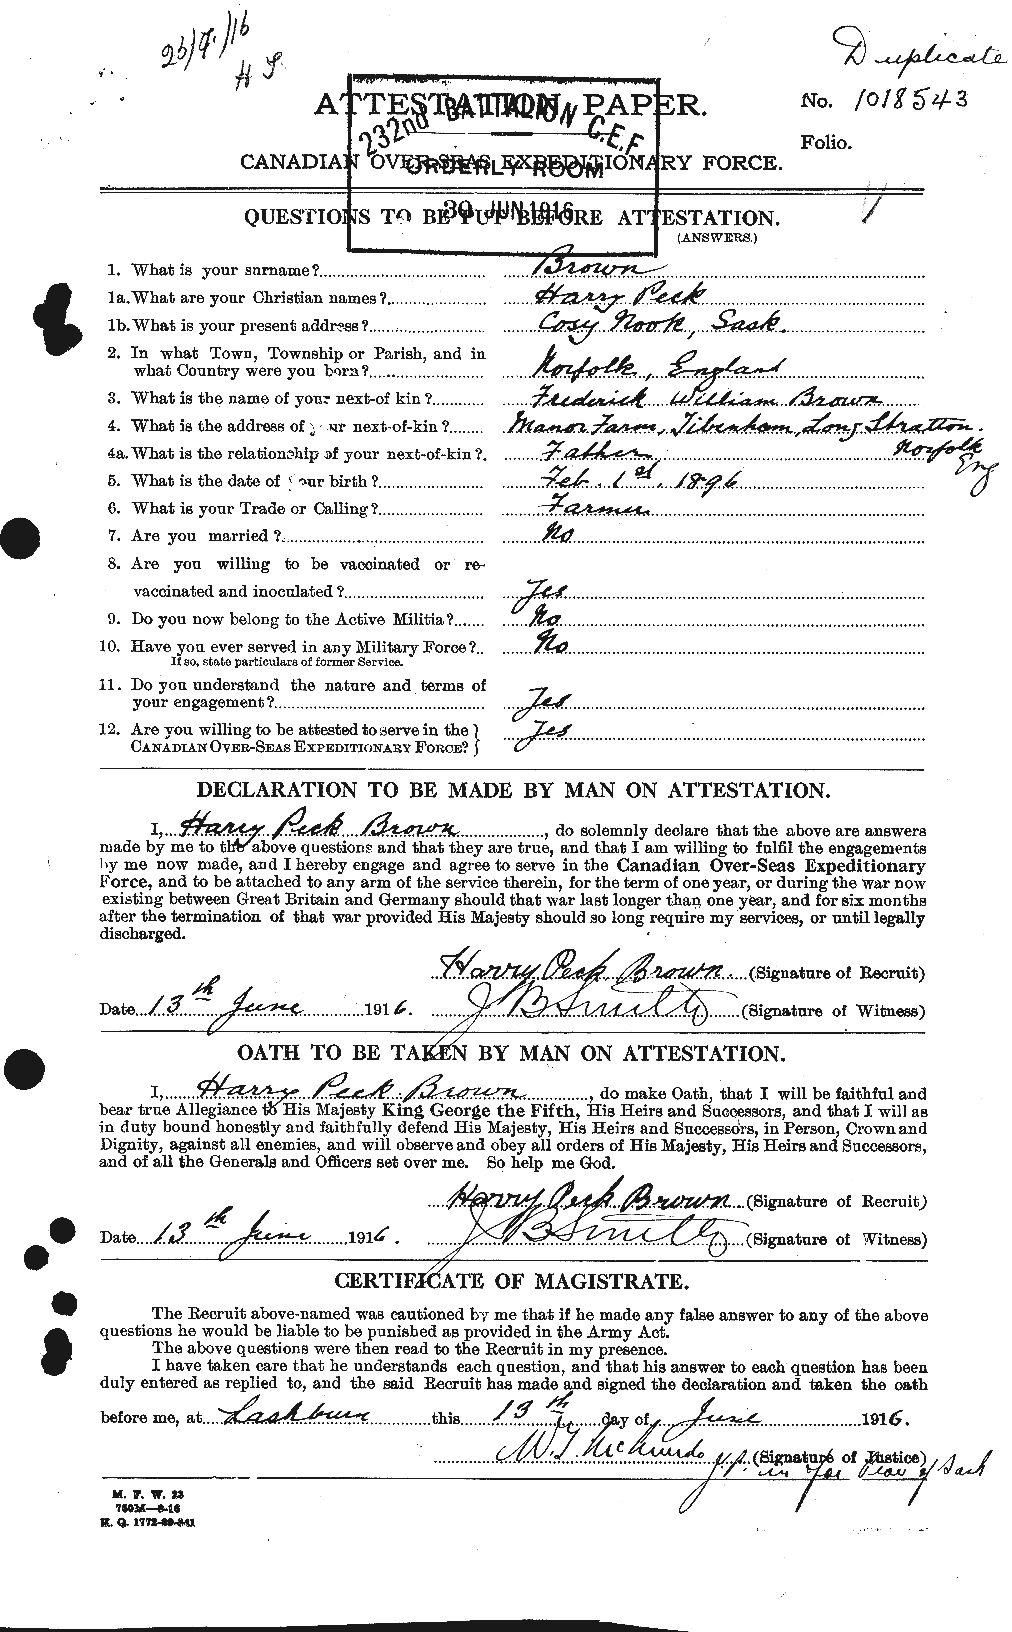 Personnel Records of the First World War - CEF 265465a